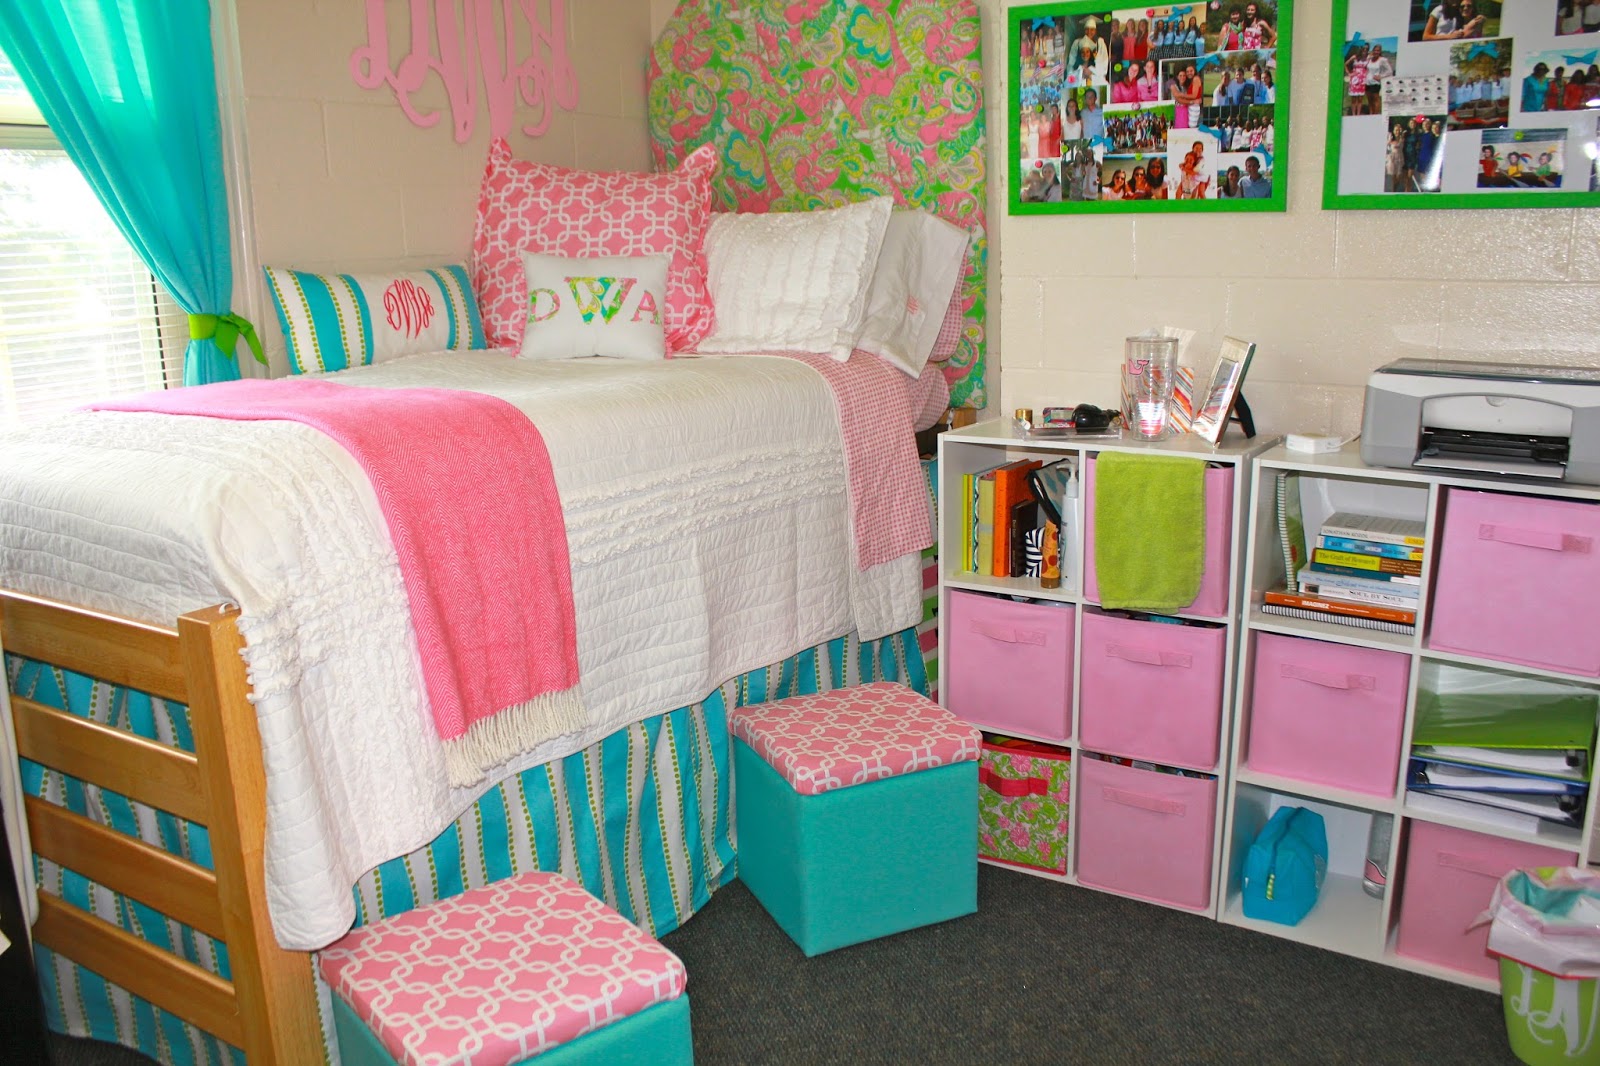 Prep In Your Step: My Dorm Room